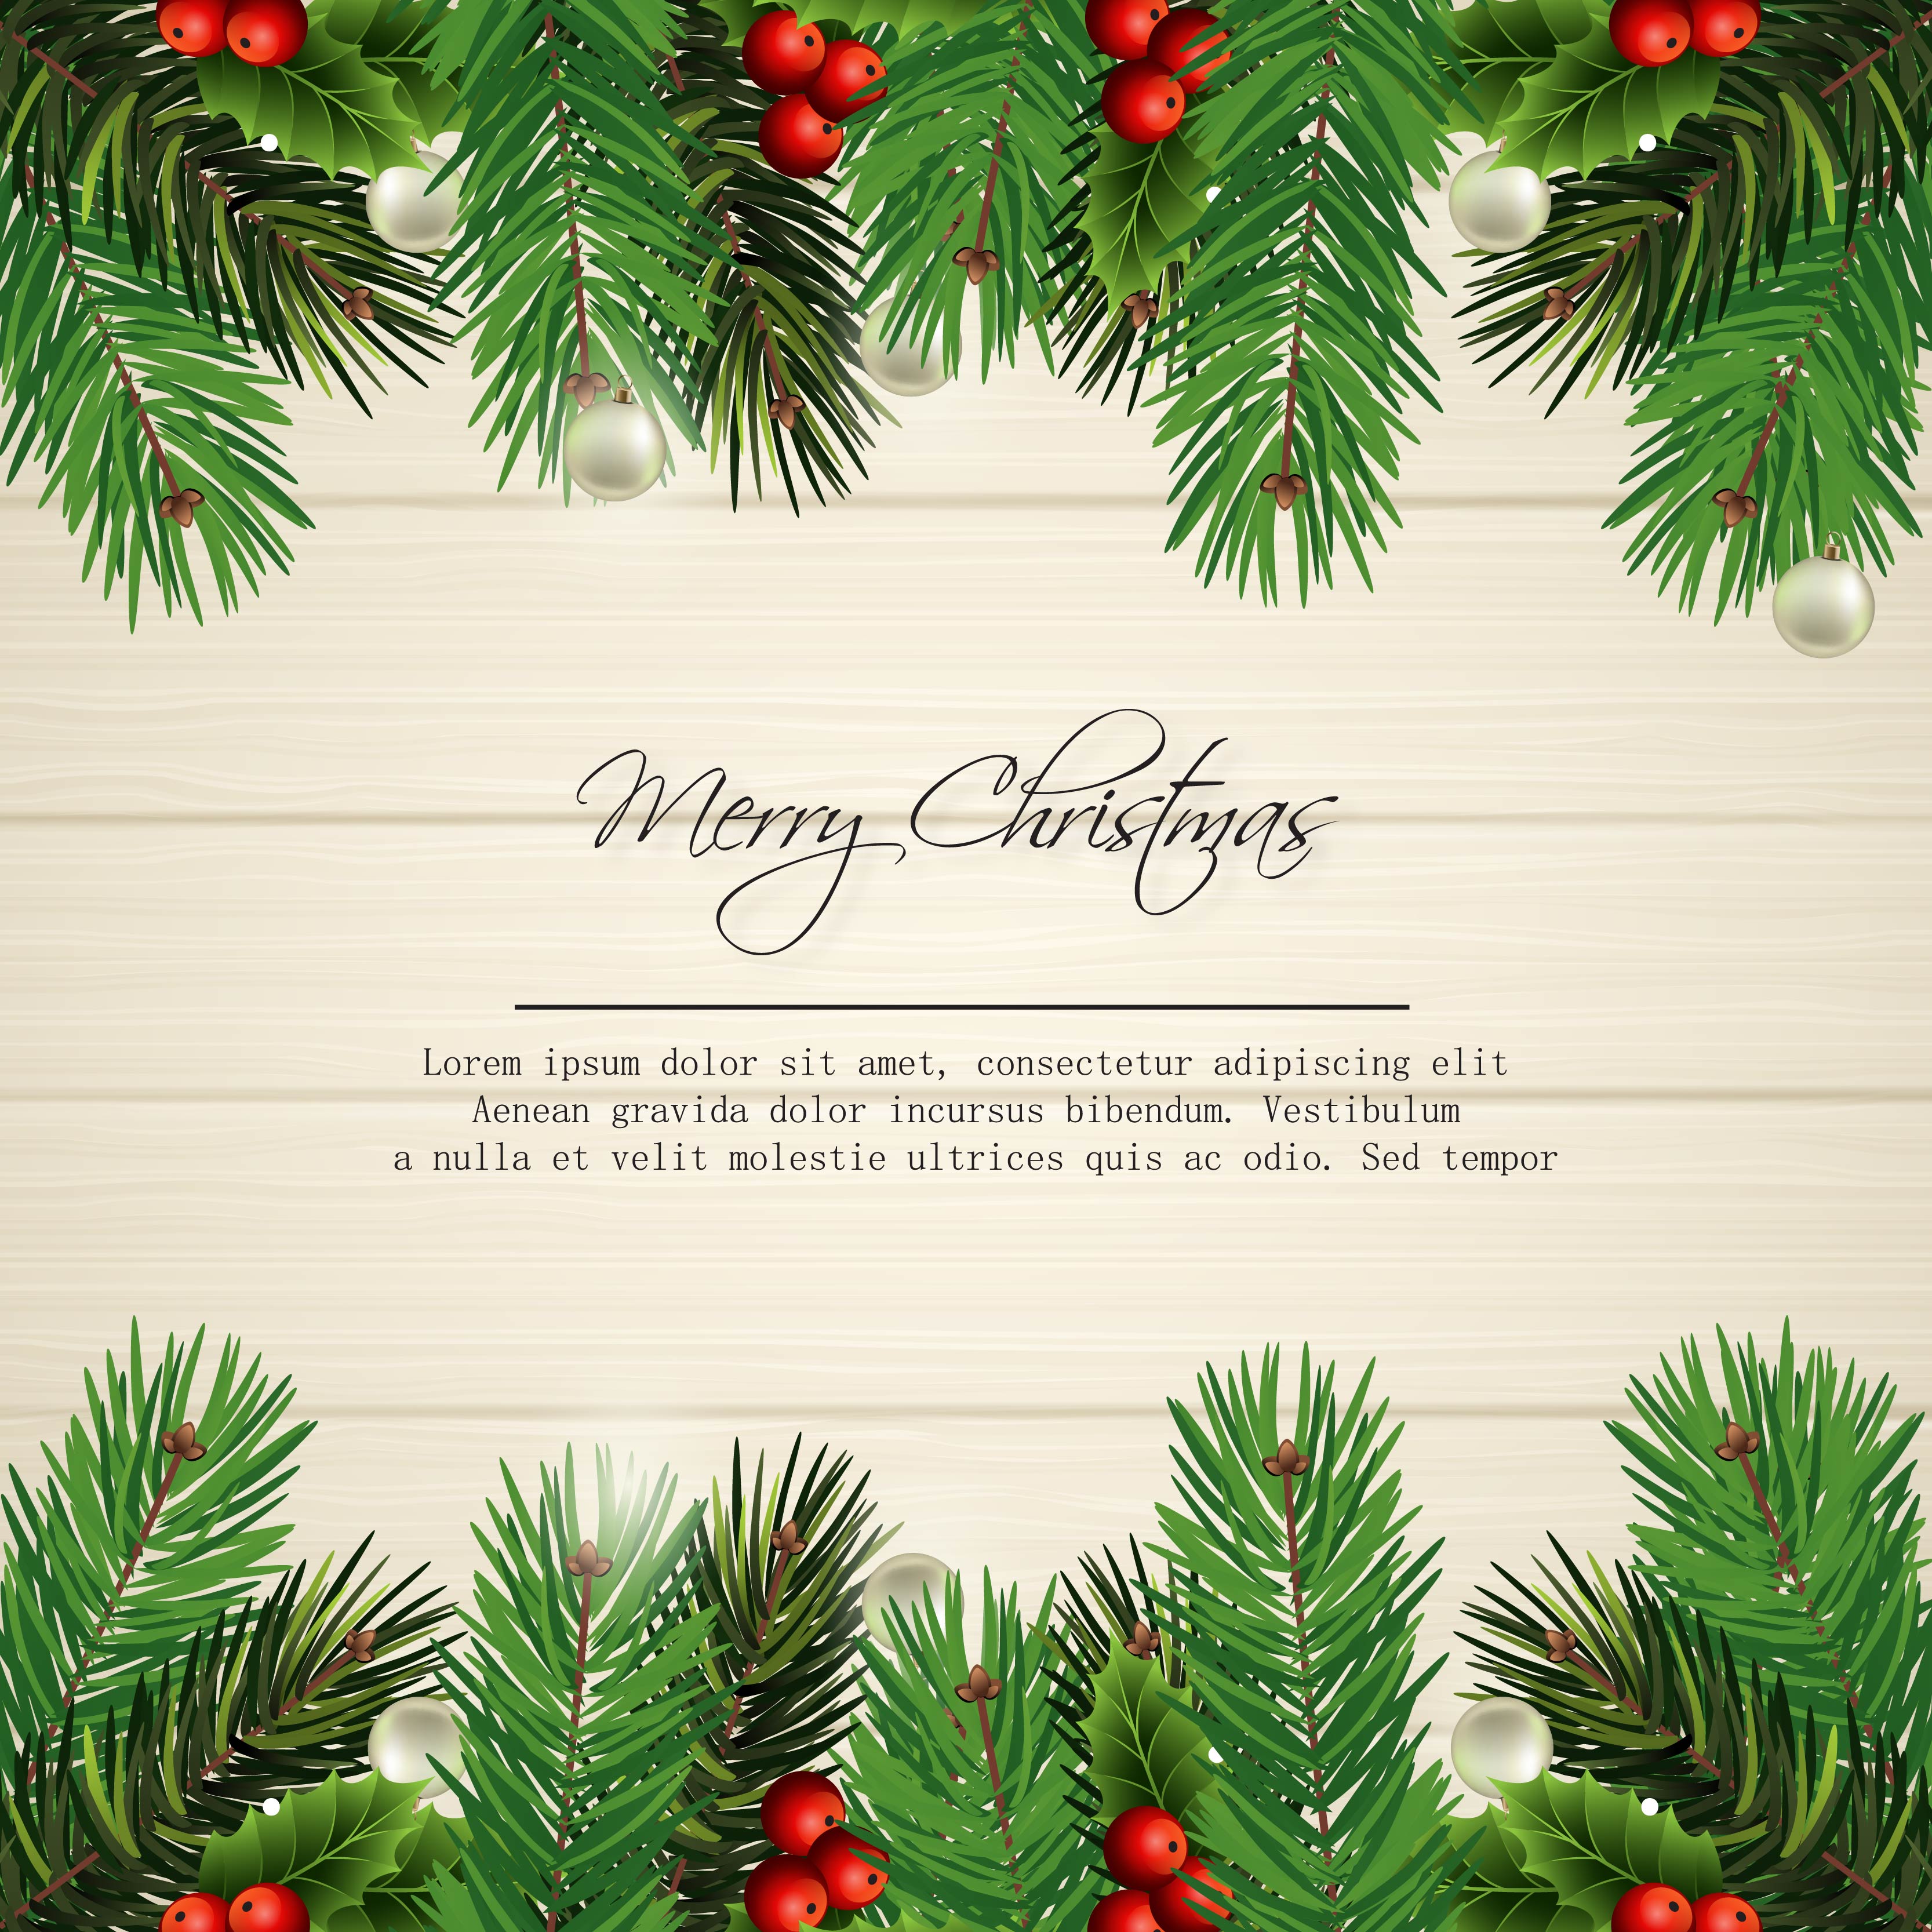 merry christmas card design with pine leaves on wood 691037 Vector Art 